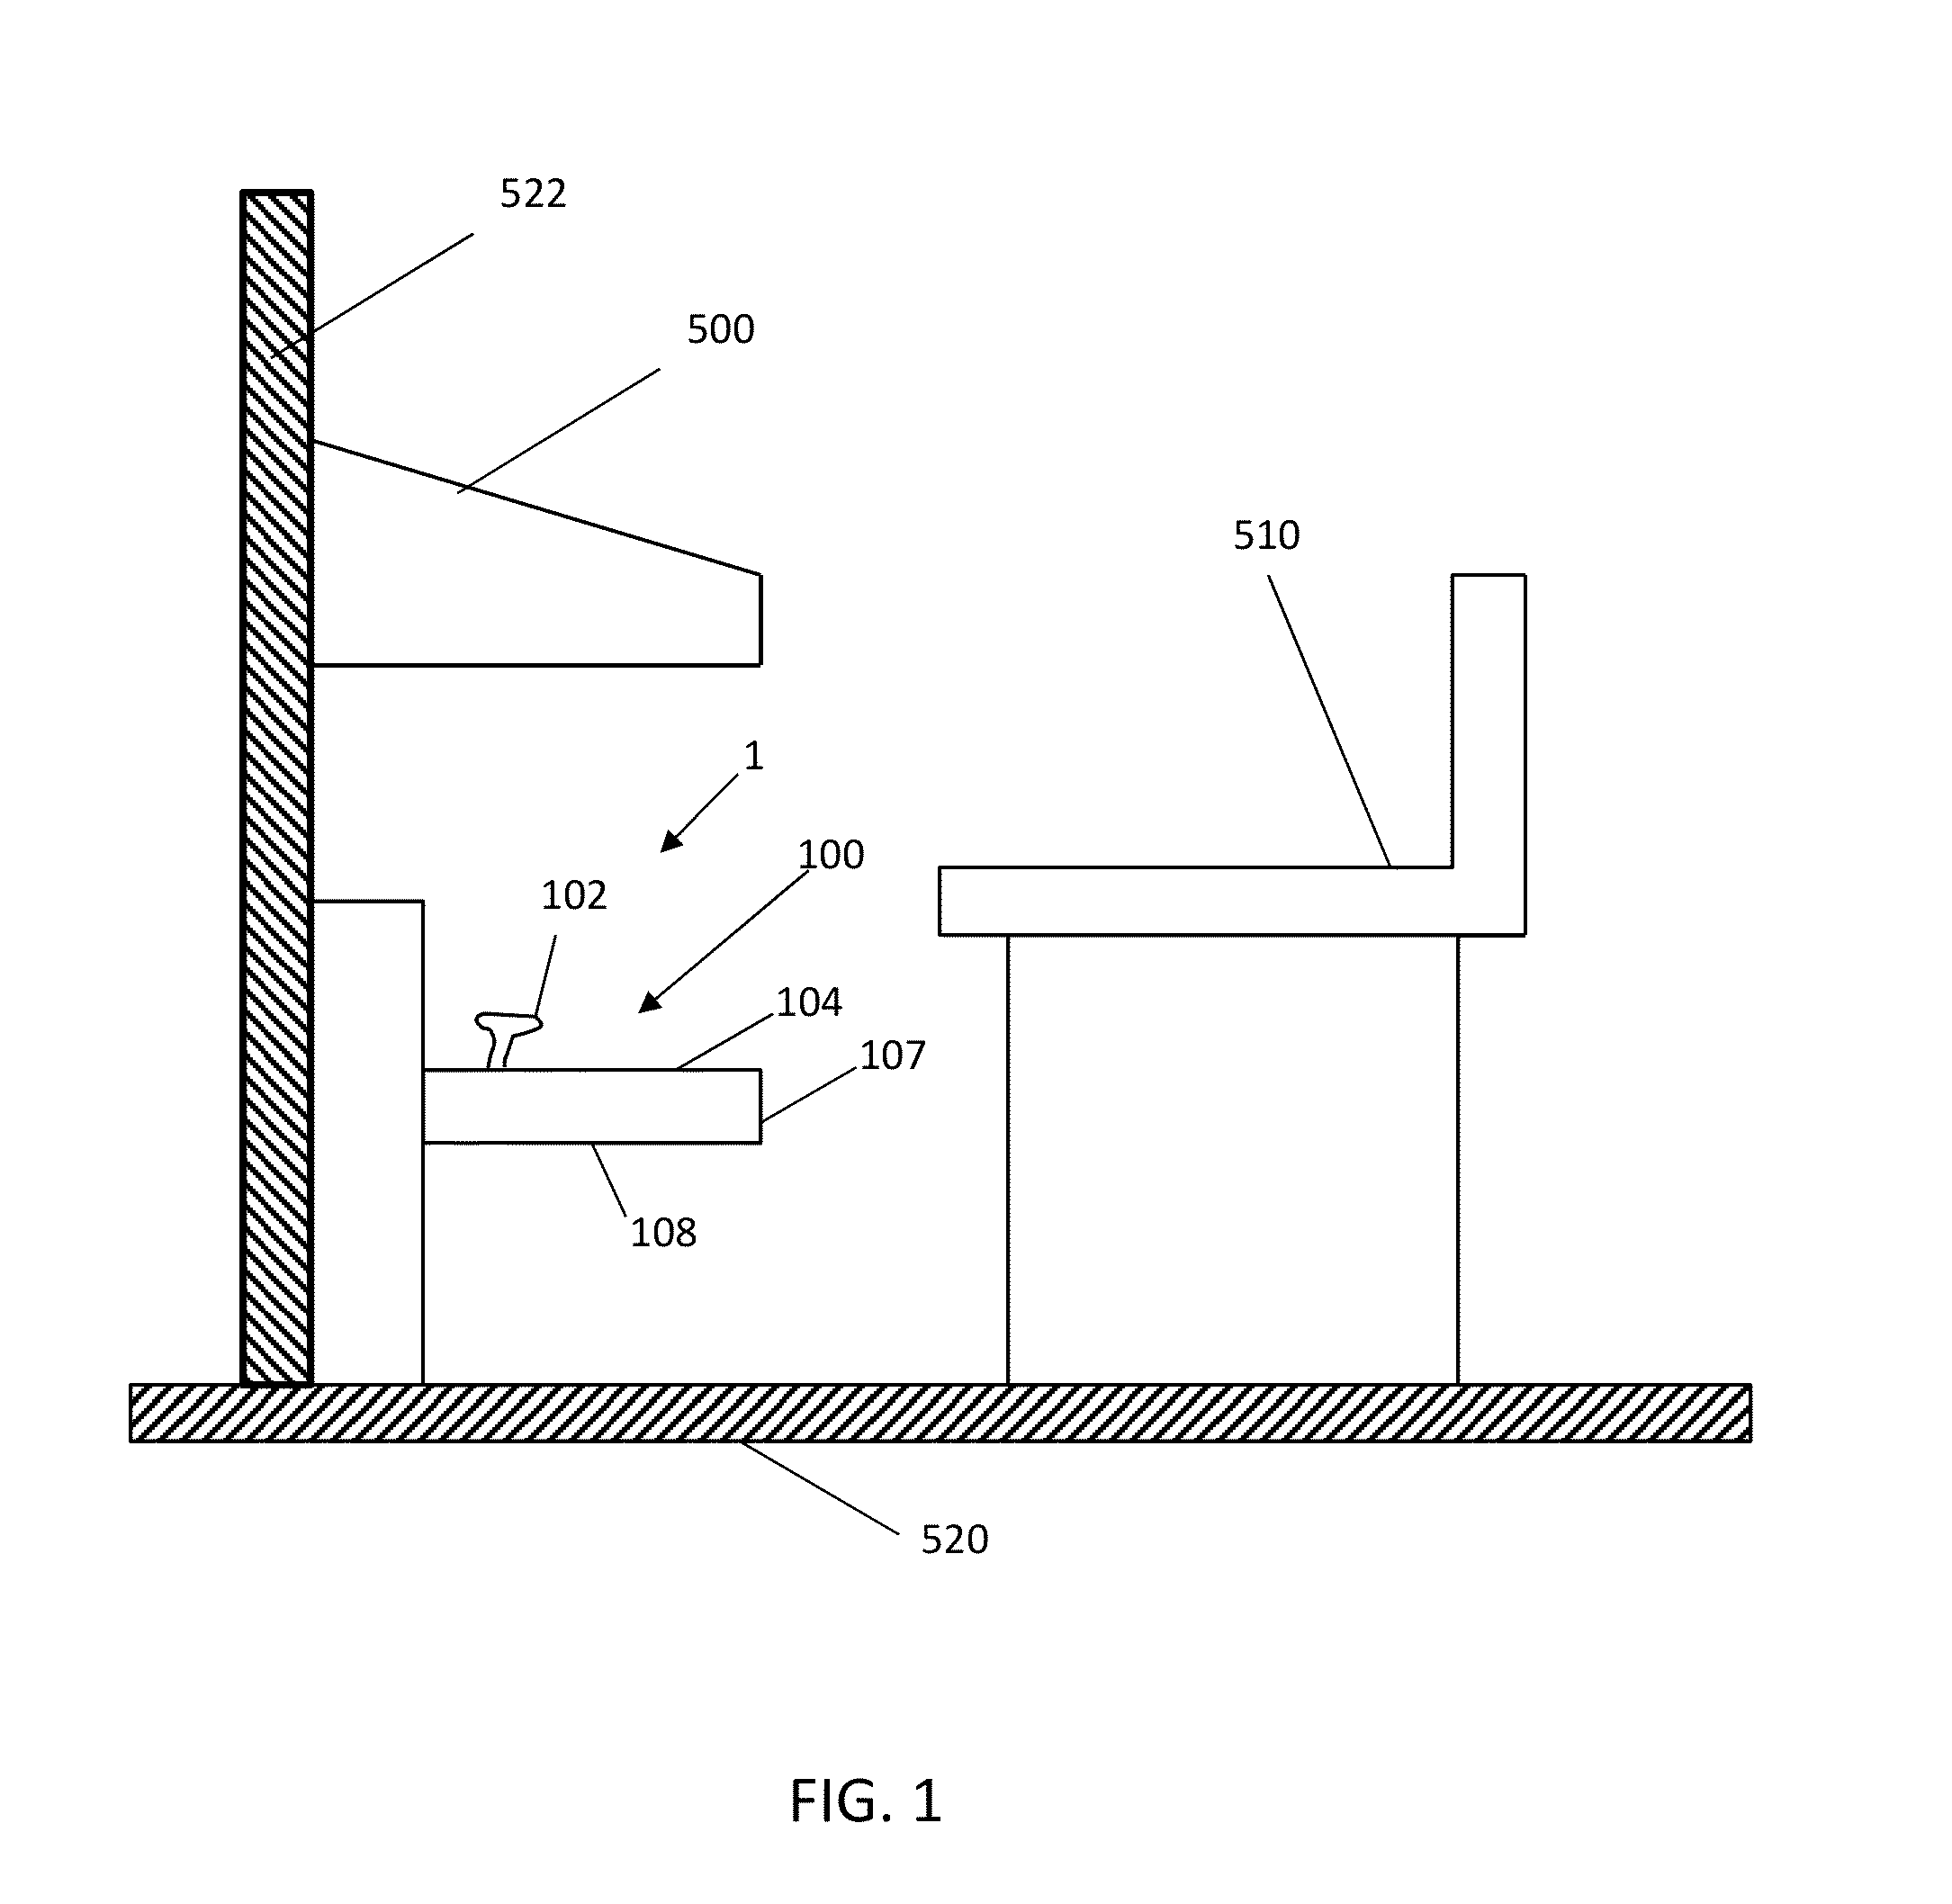 Height-Adjustable Pedestal for a Vehicle